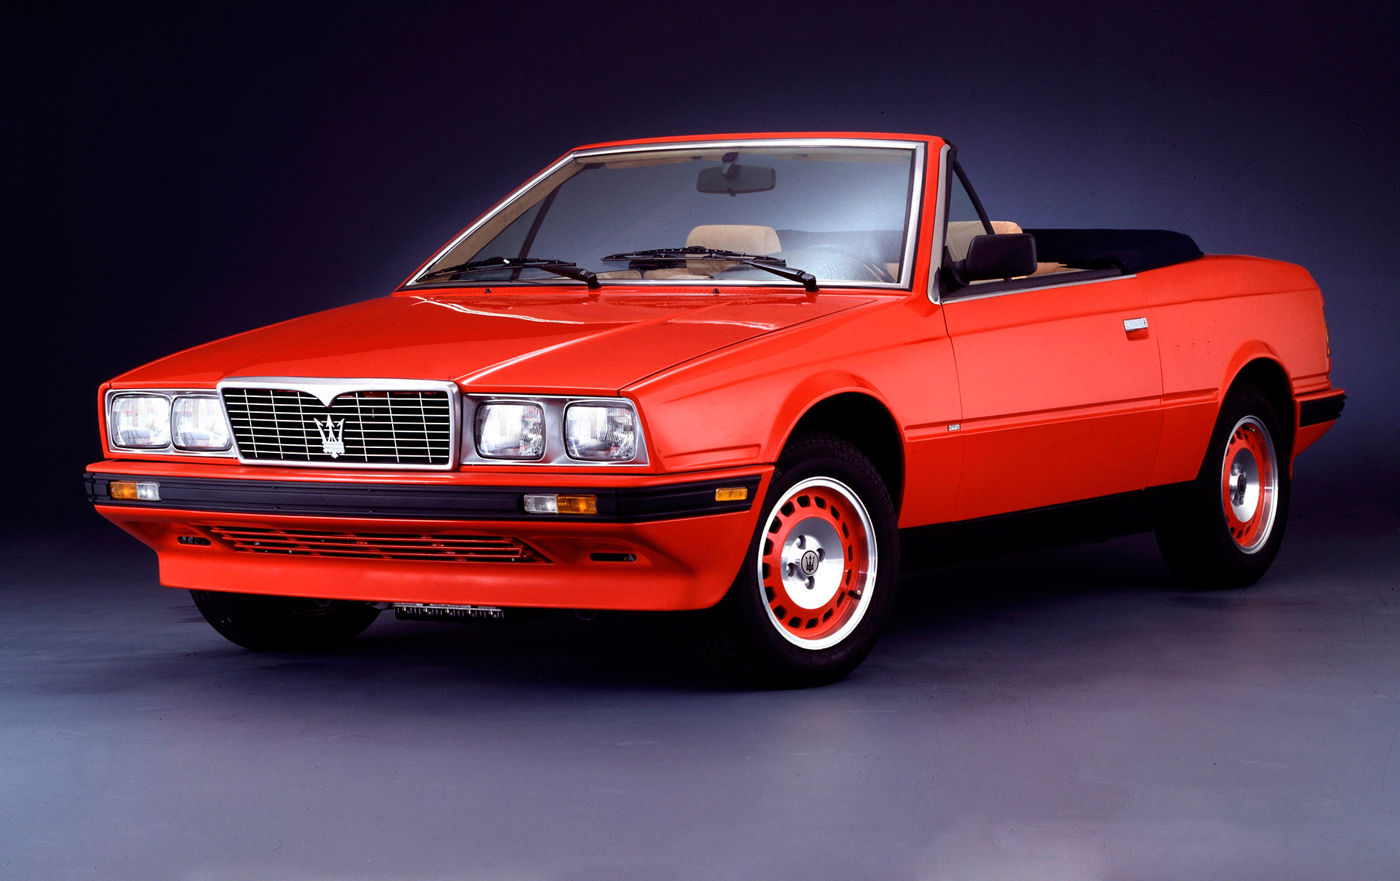 1989 Maserati Biturbo Spyder - exterior view of the classic convertible in red